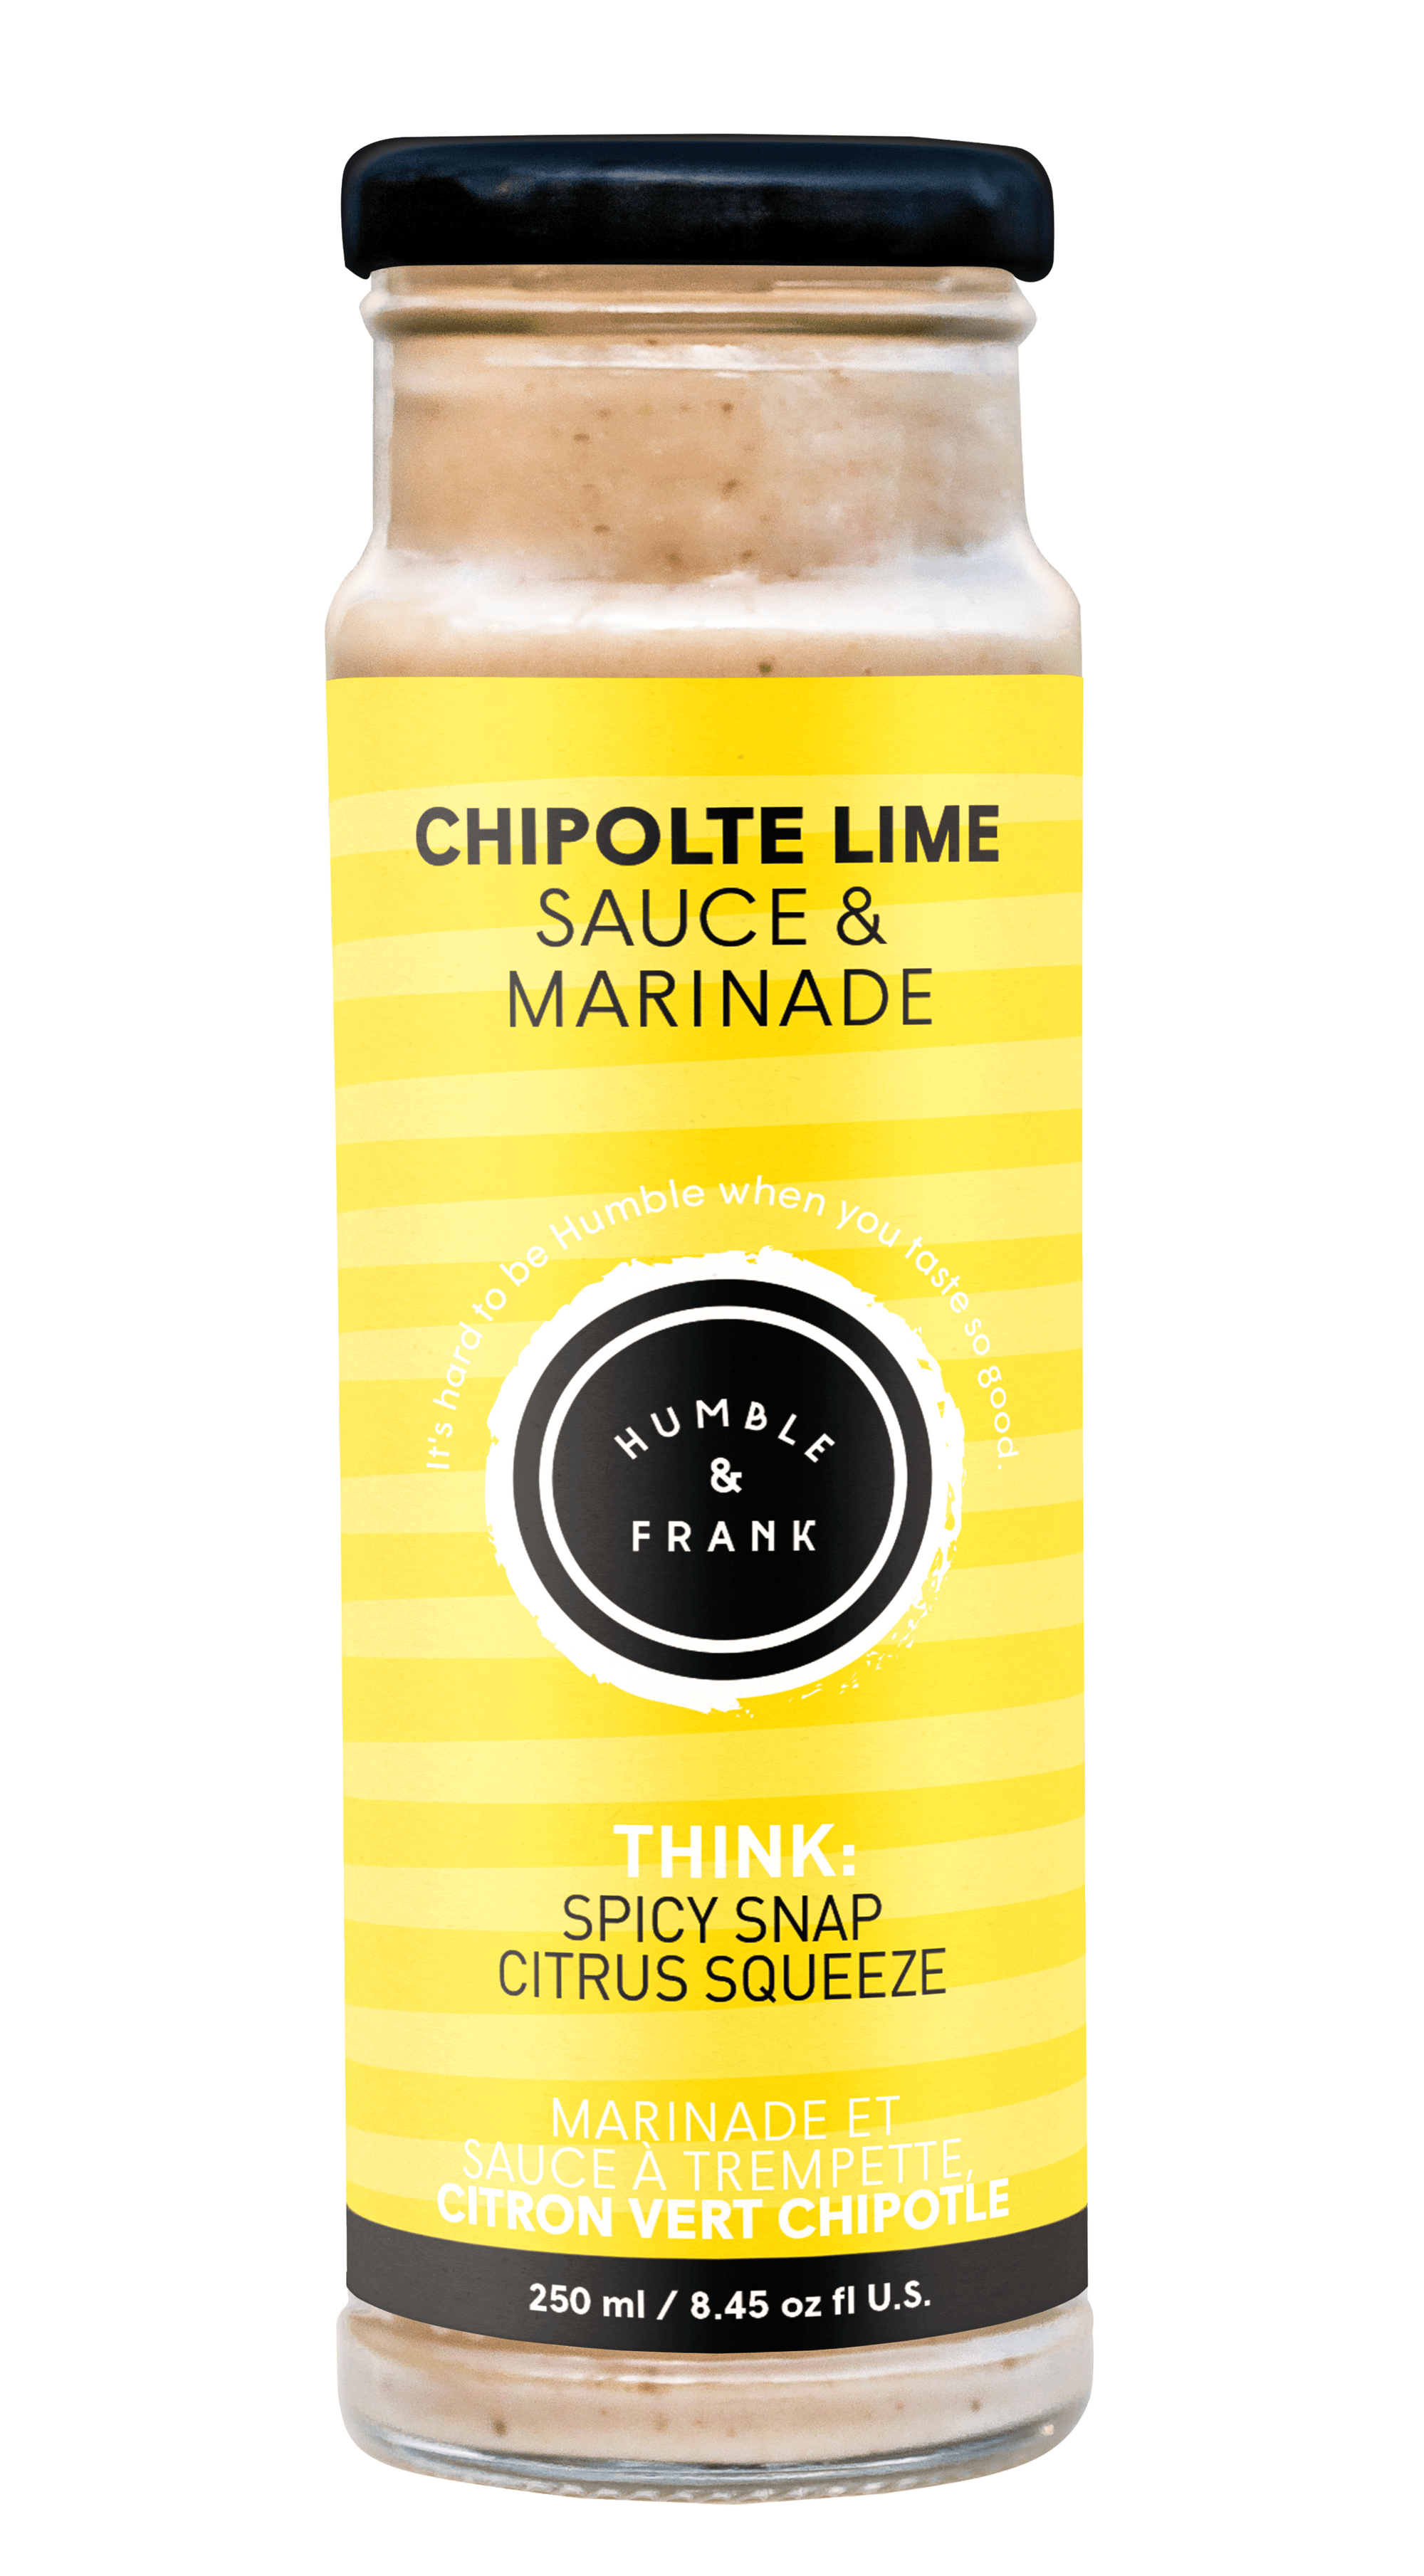 CHIPOLTE LIME SAUCE